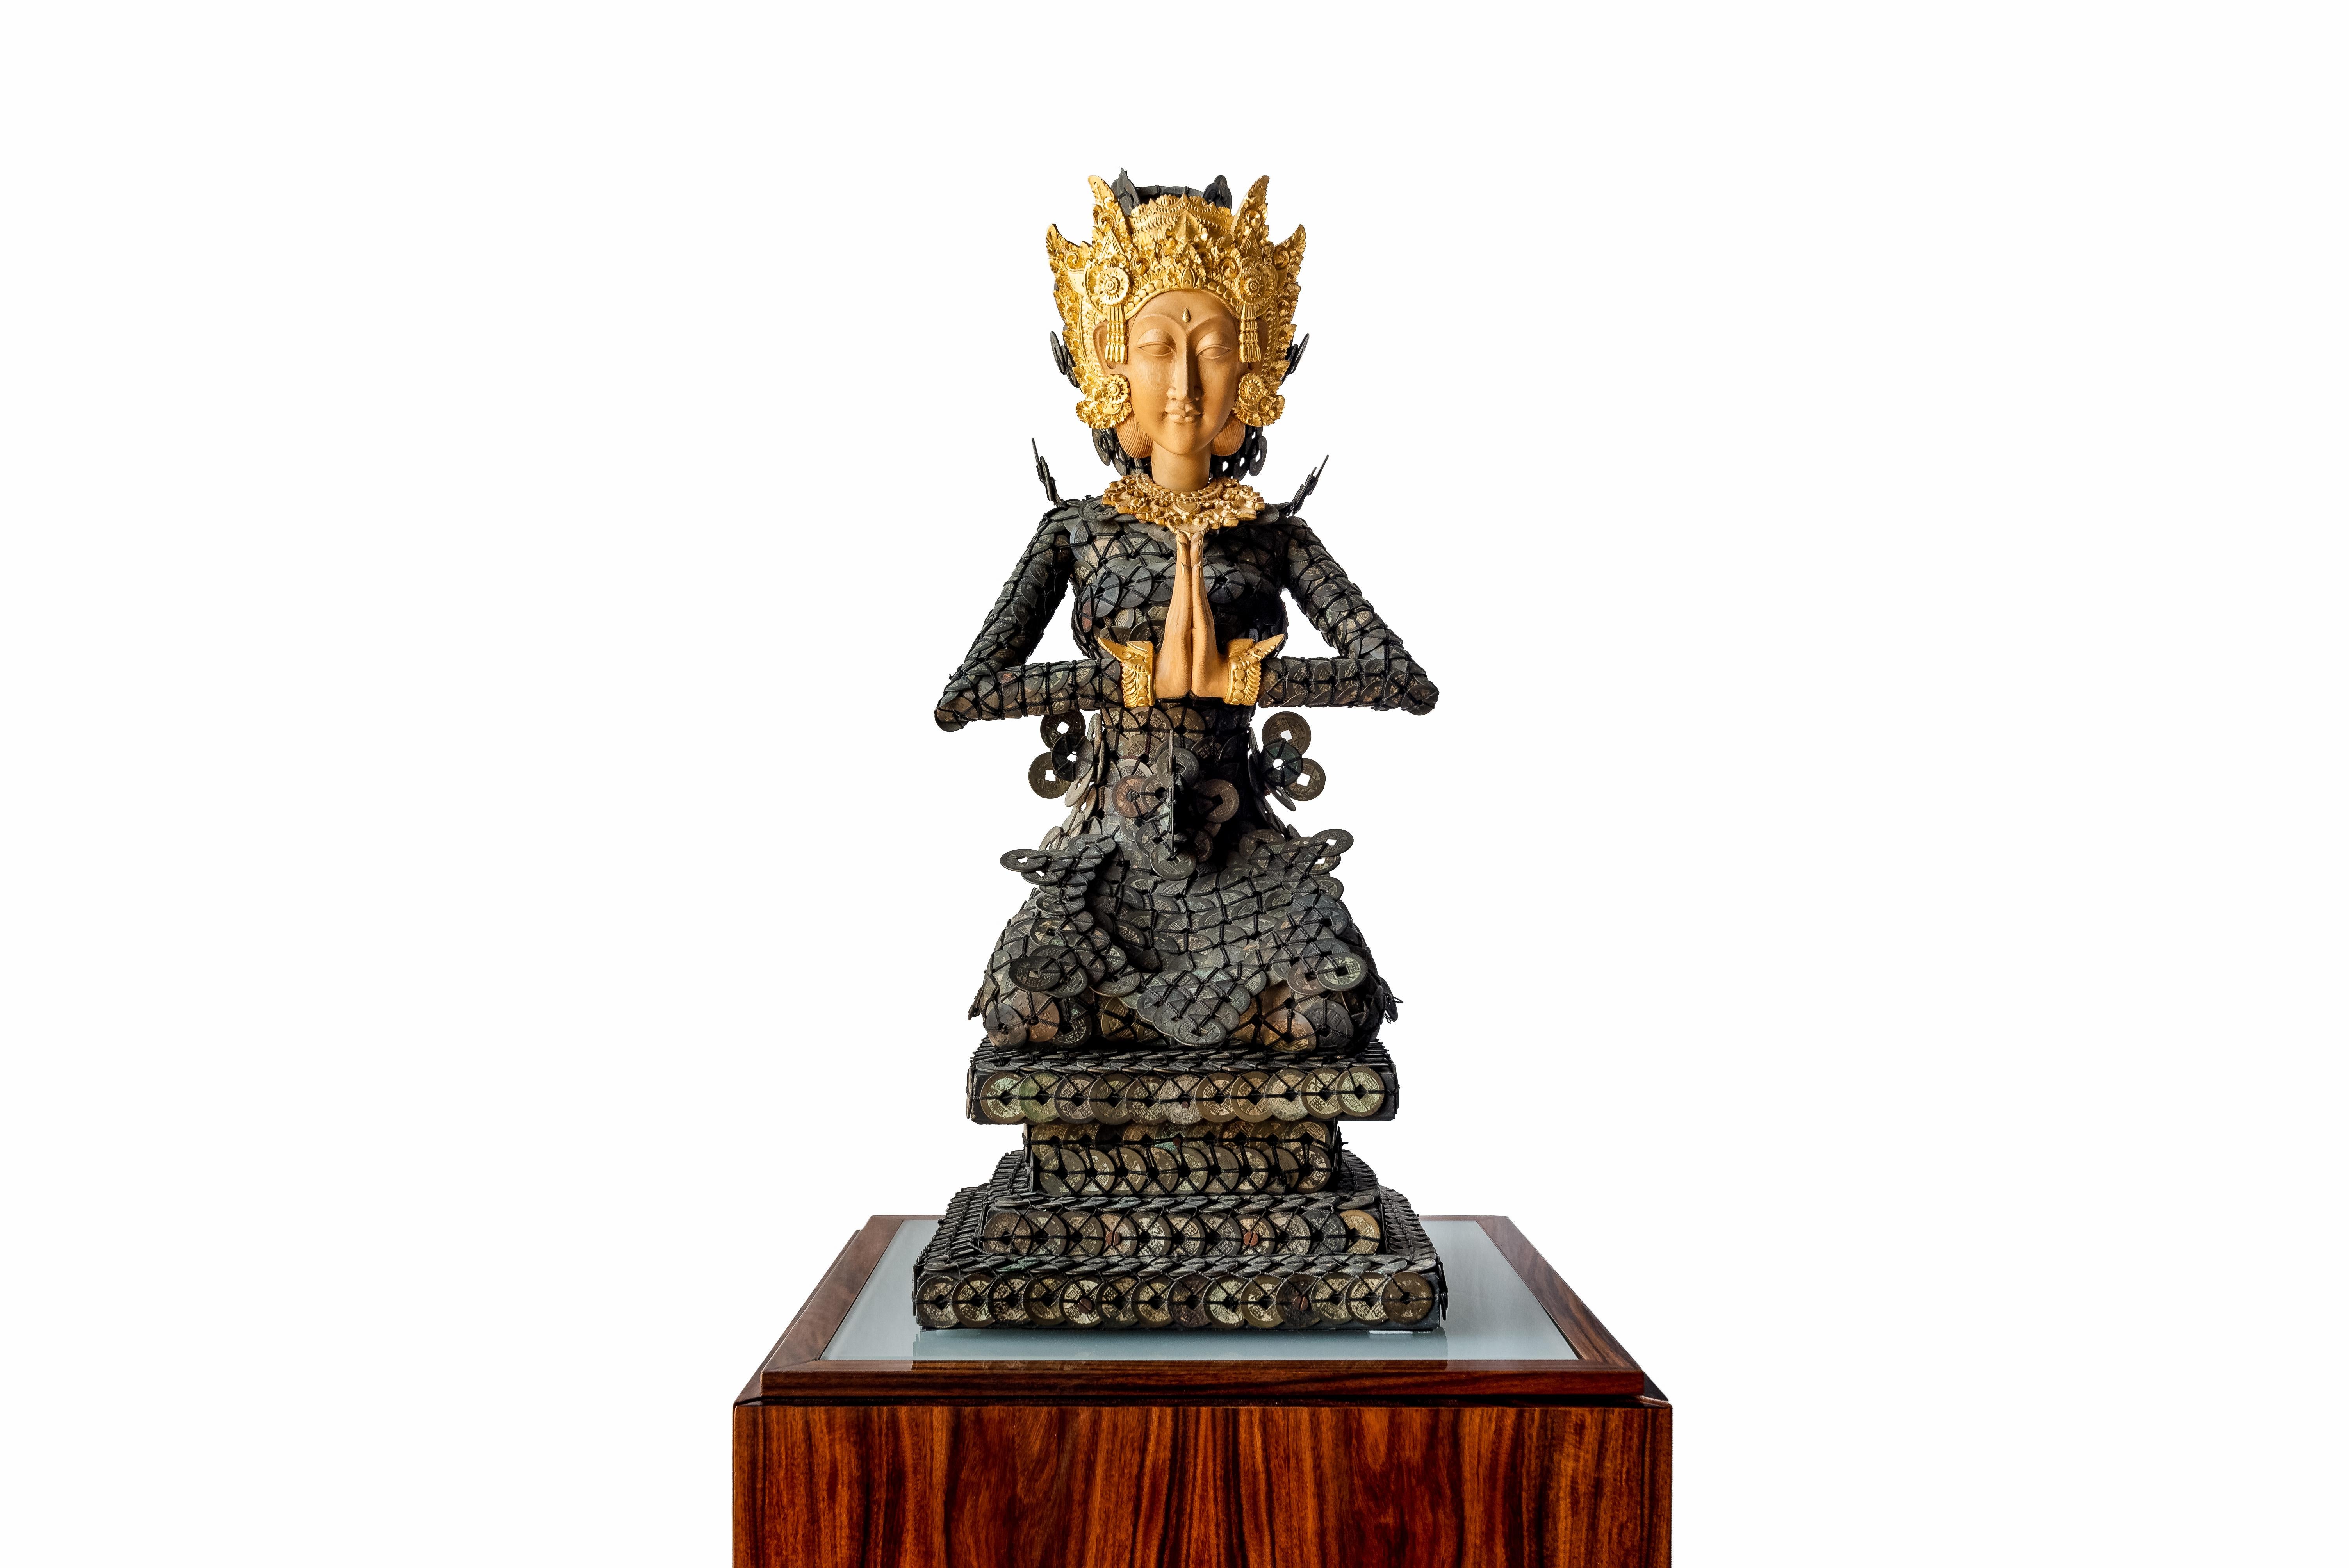 Indonesian 20th Century Figurative Dewi Sri Statue Qing Dynasty Copper Coins and Gold Wood